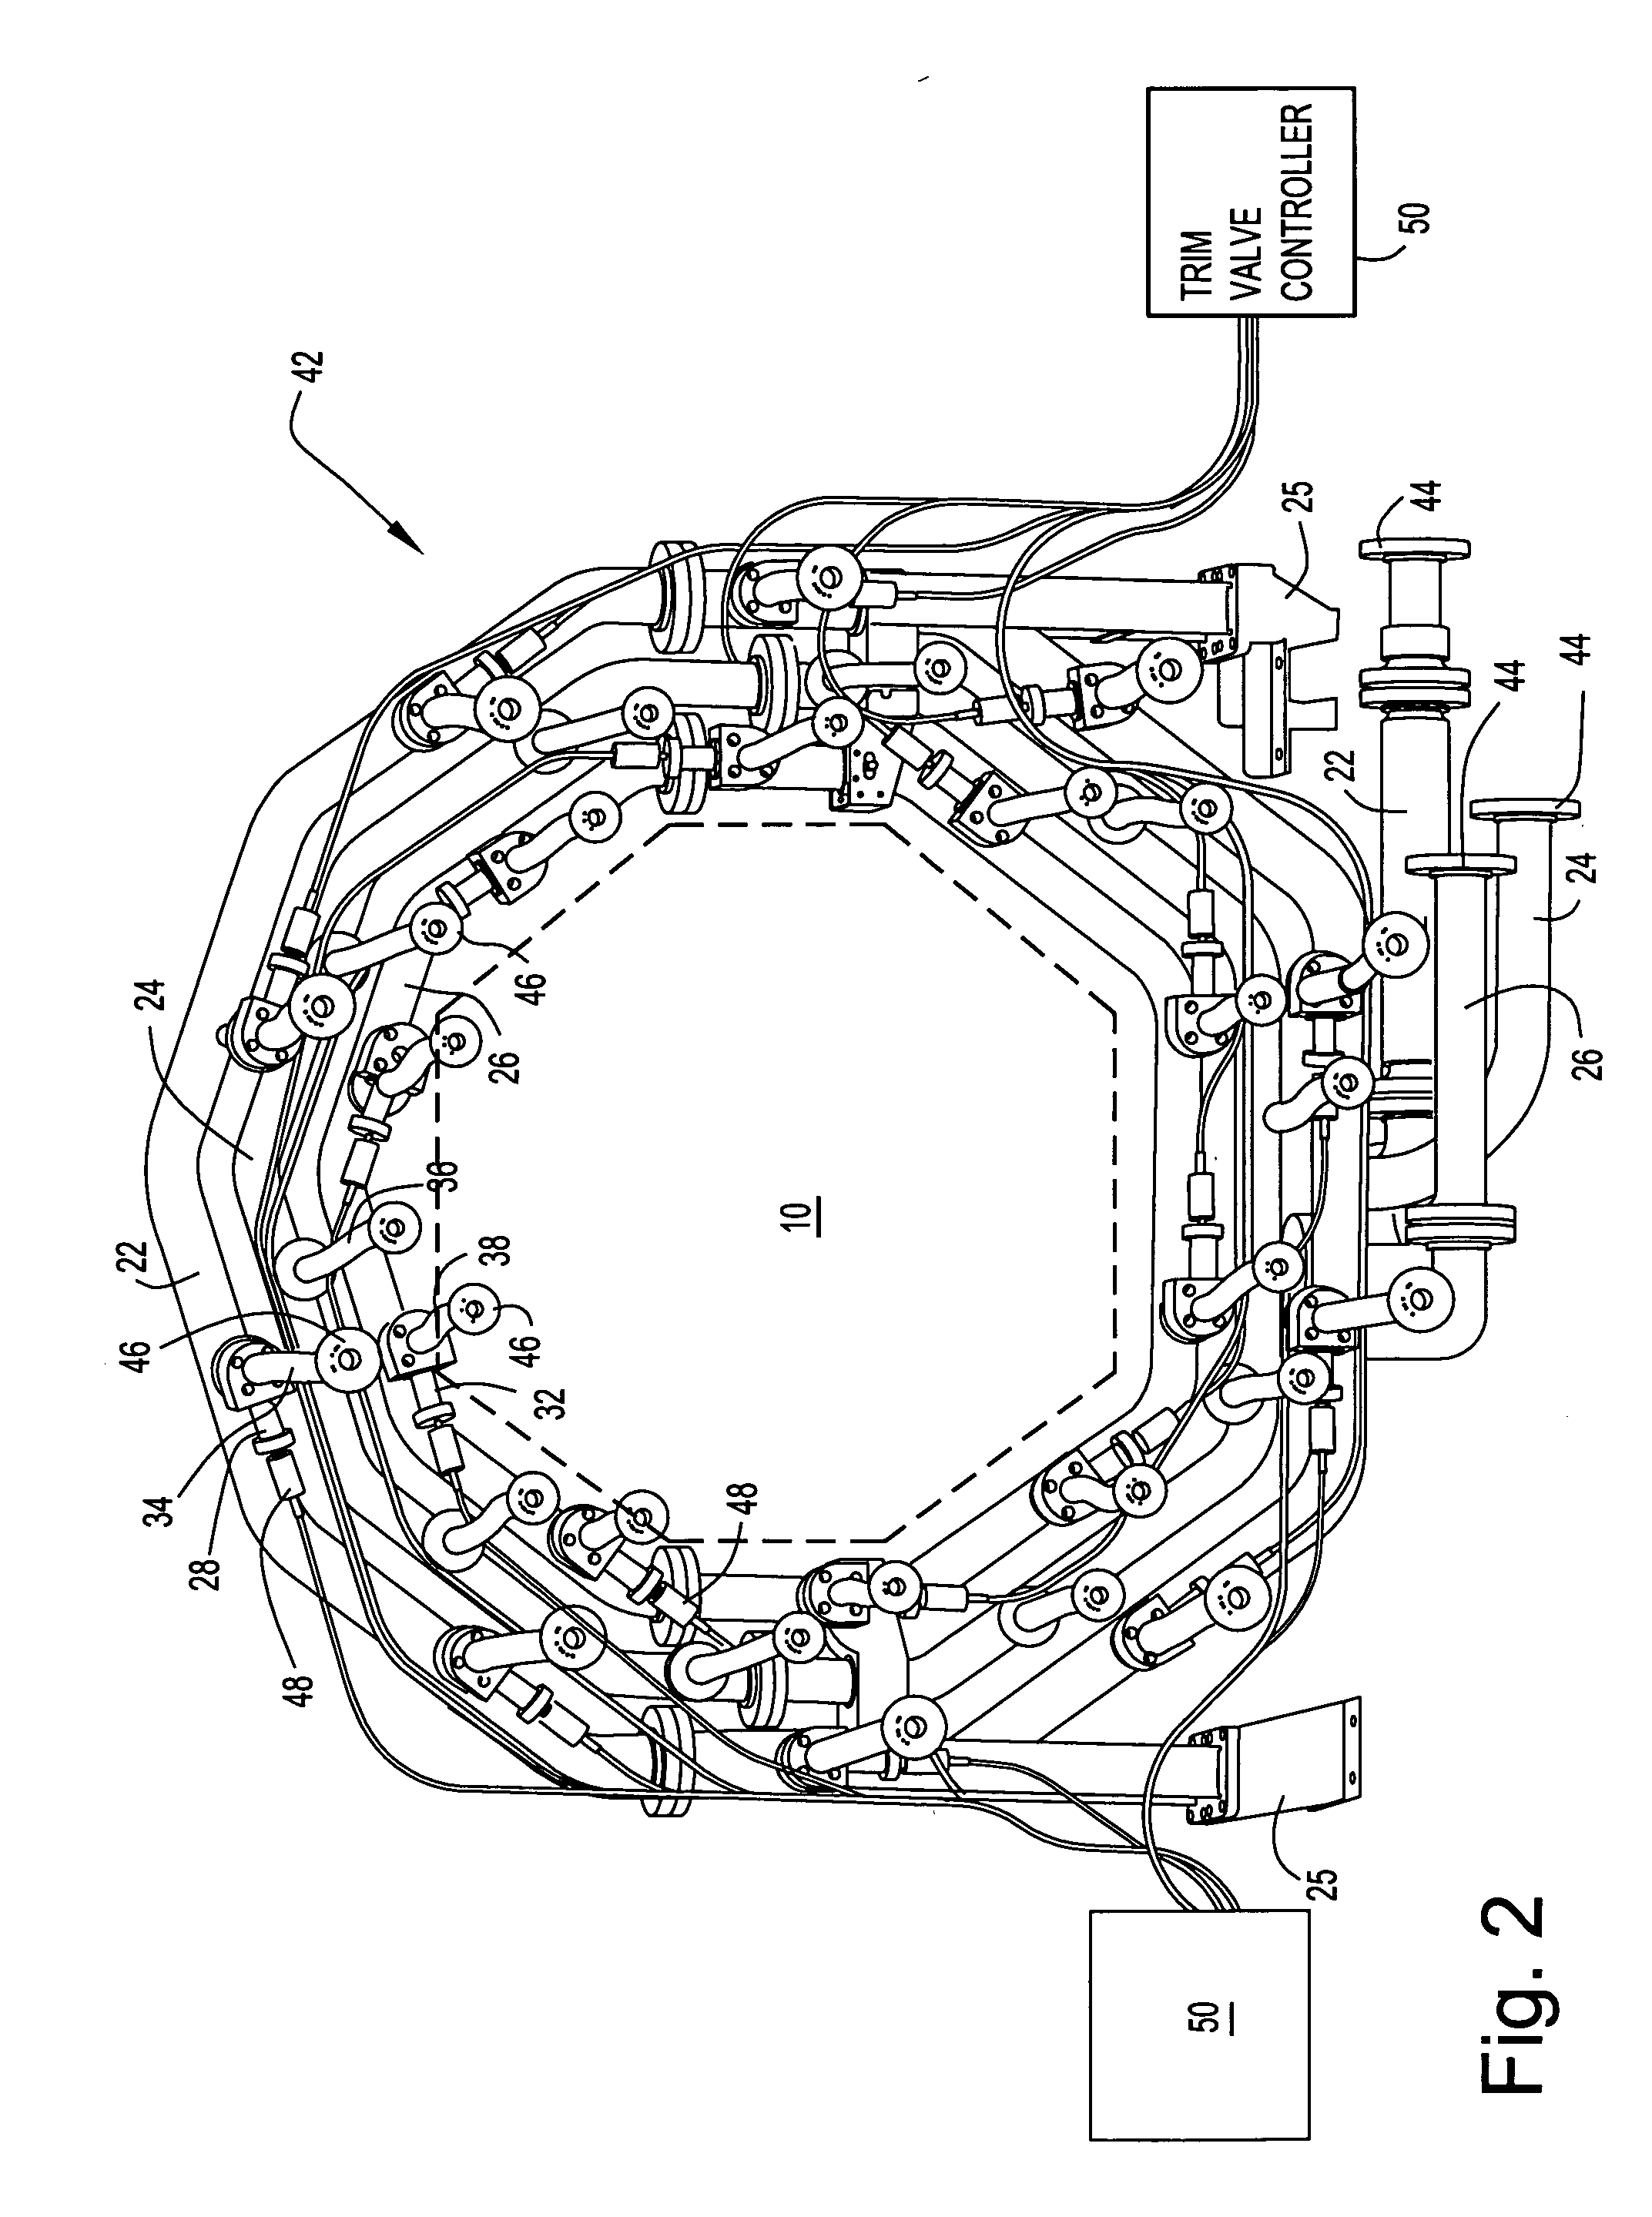 Method and apparatus for automatically actuating fuel trim valves in a gas